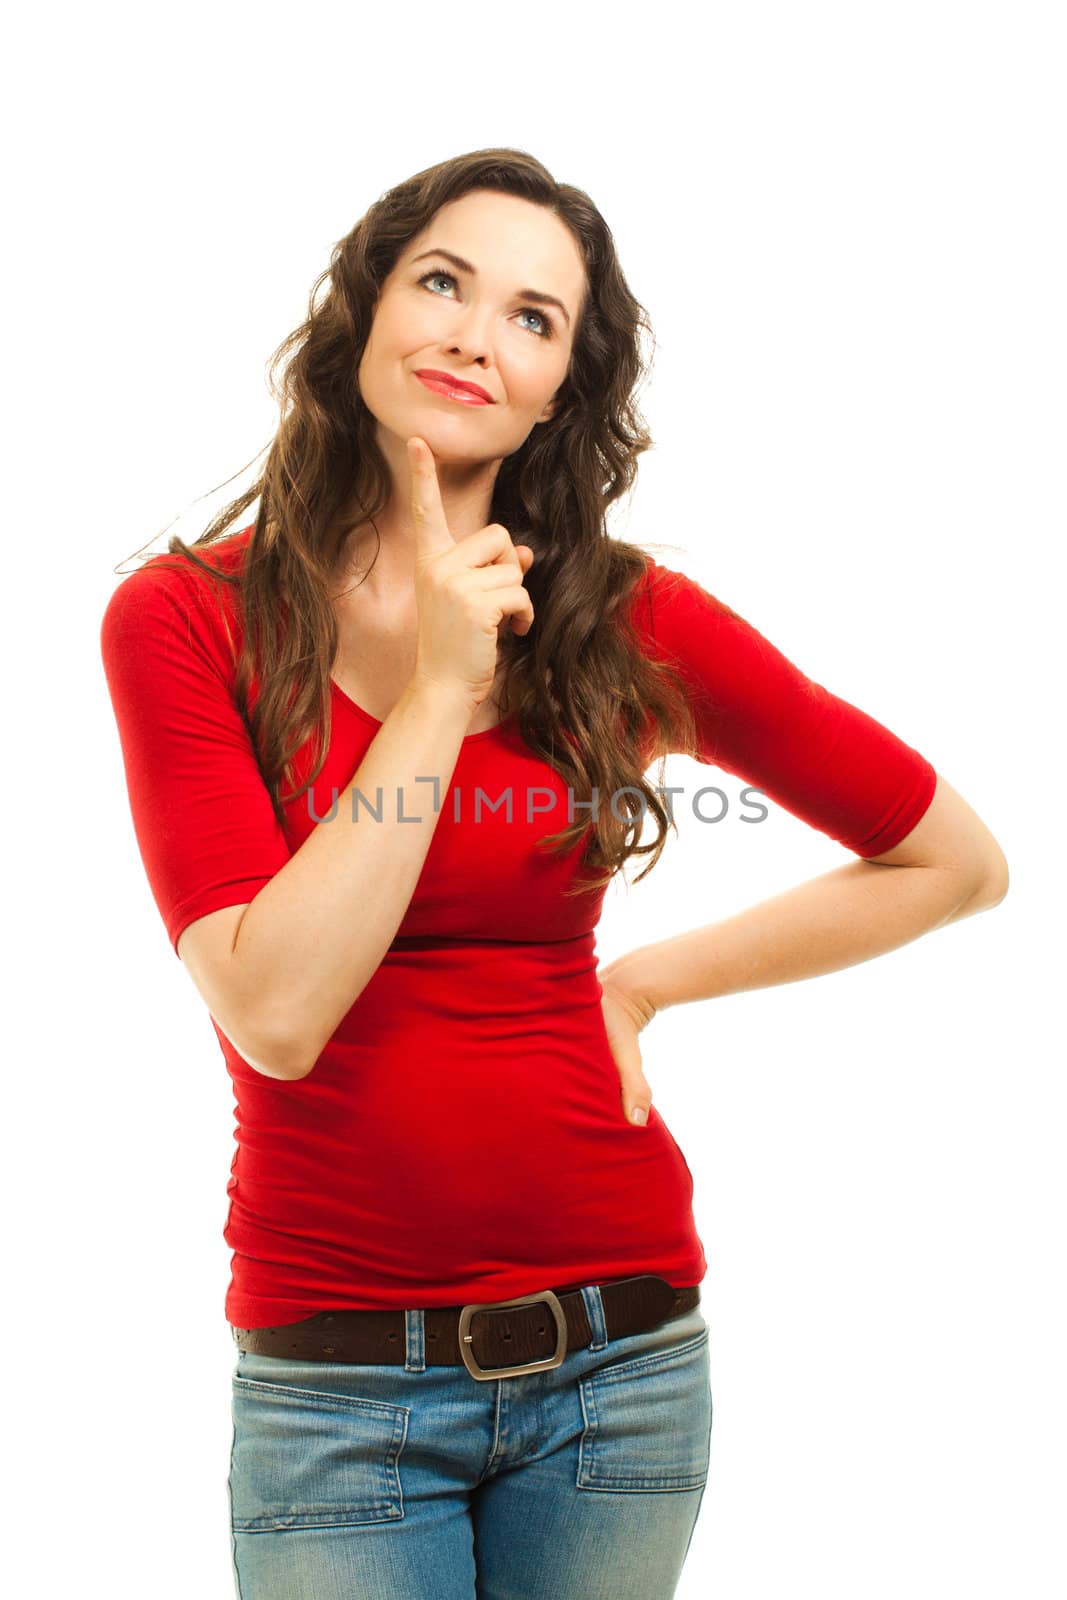 A beautiful young woman wearing a christmas red top and looking contemplative. Isolated over white.